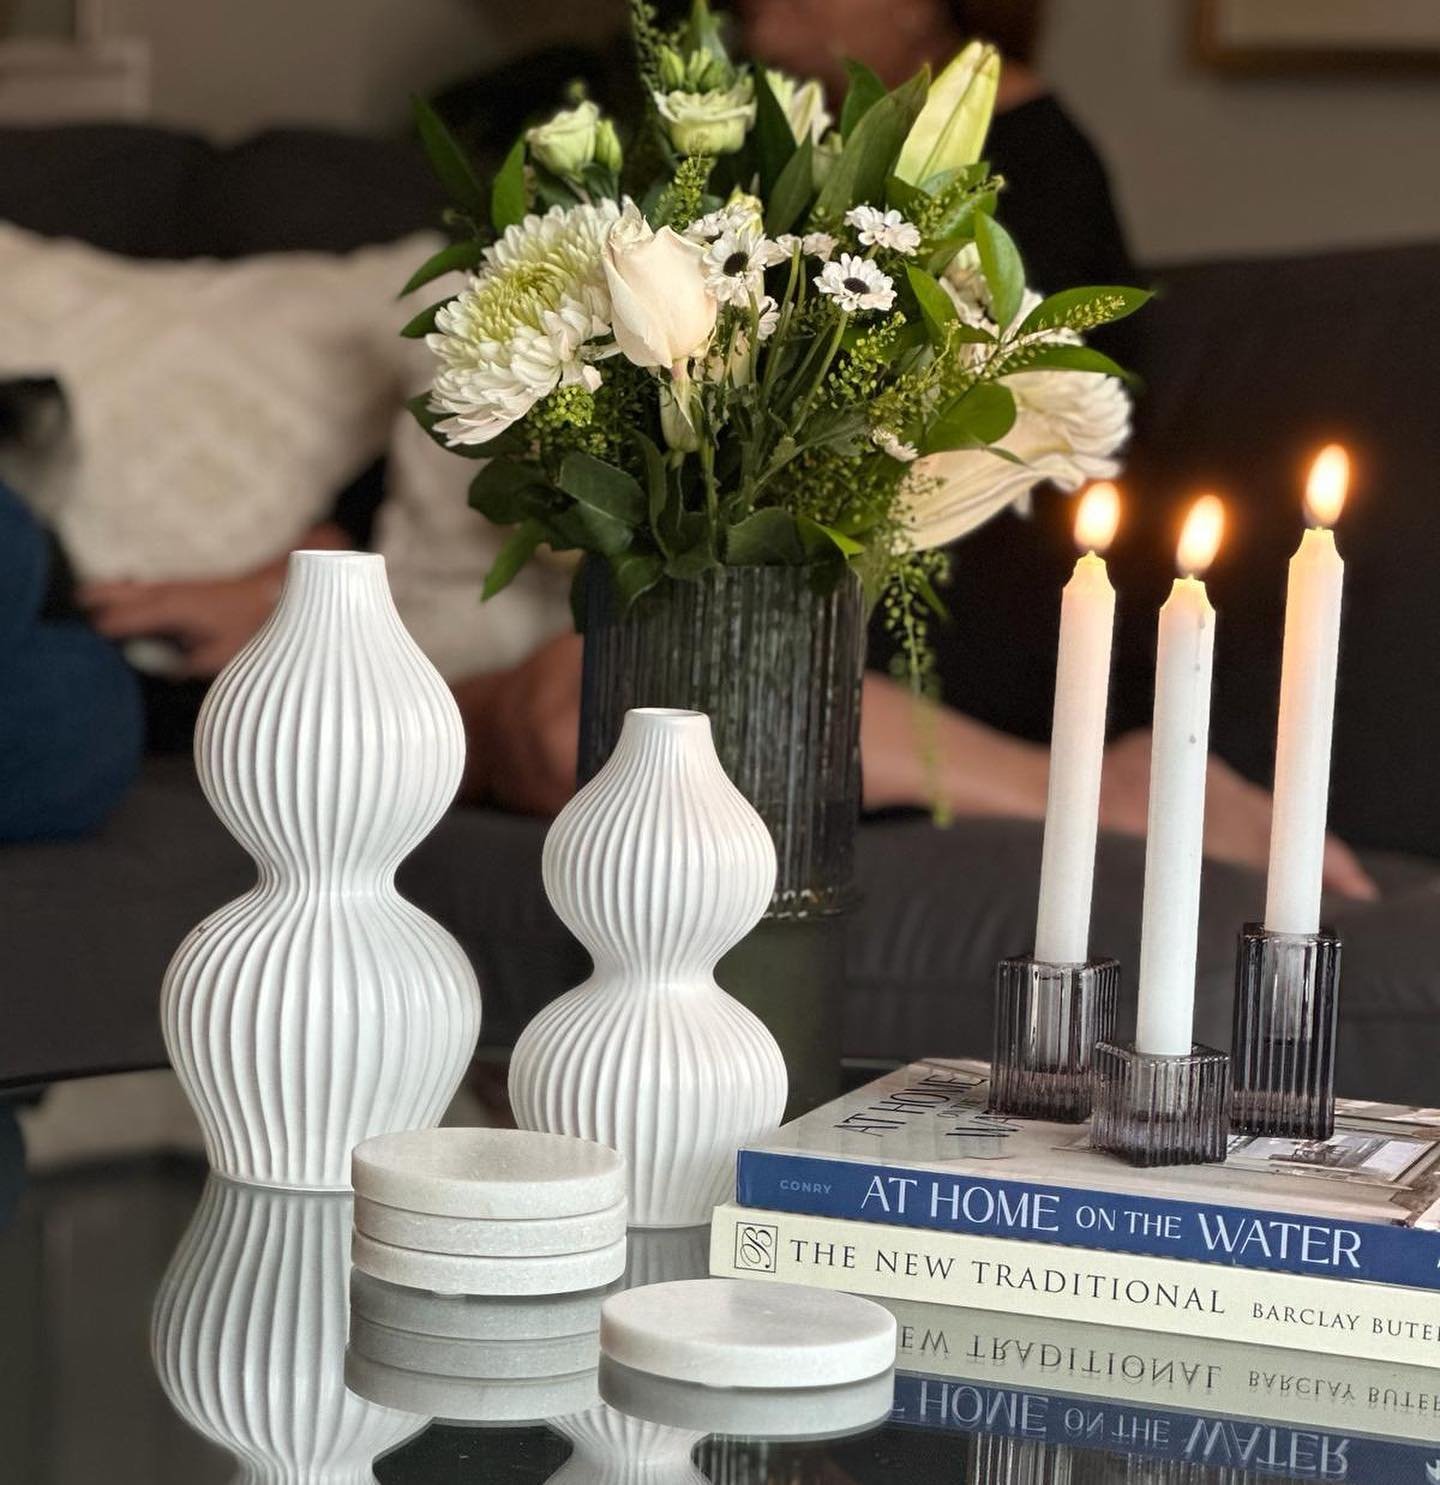 Our Serene Scene Vignette at Kenda&rsquo;s house.  She set it up on her coffee table and is ready to entertain. 

Shop our Vignette collections - www.designervignette.com

We would love to show you our collections at the @kateandcodesigninc office.  